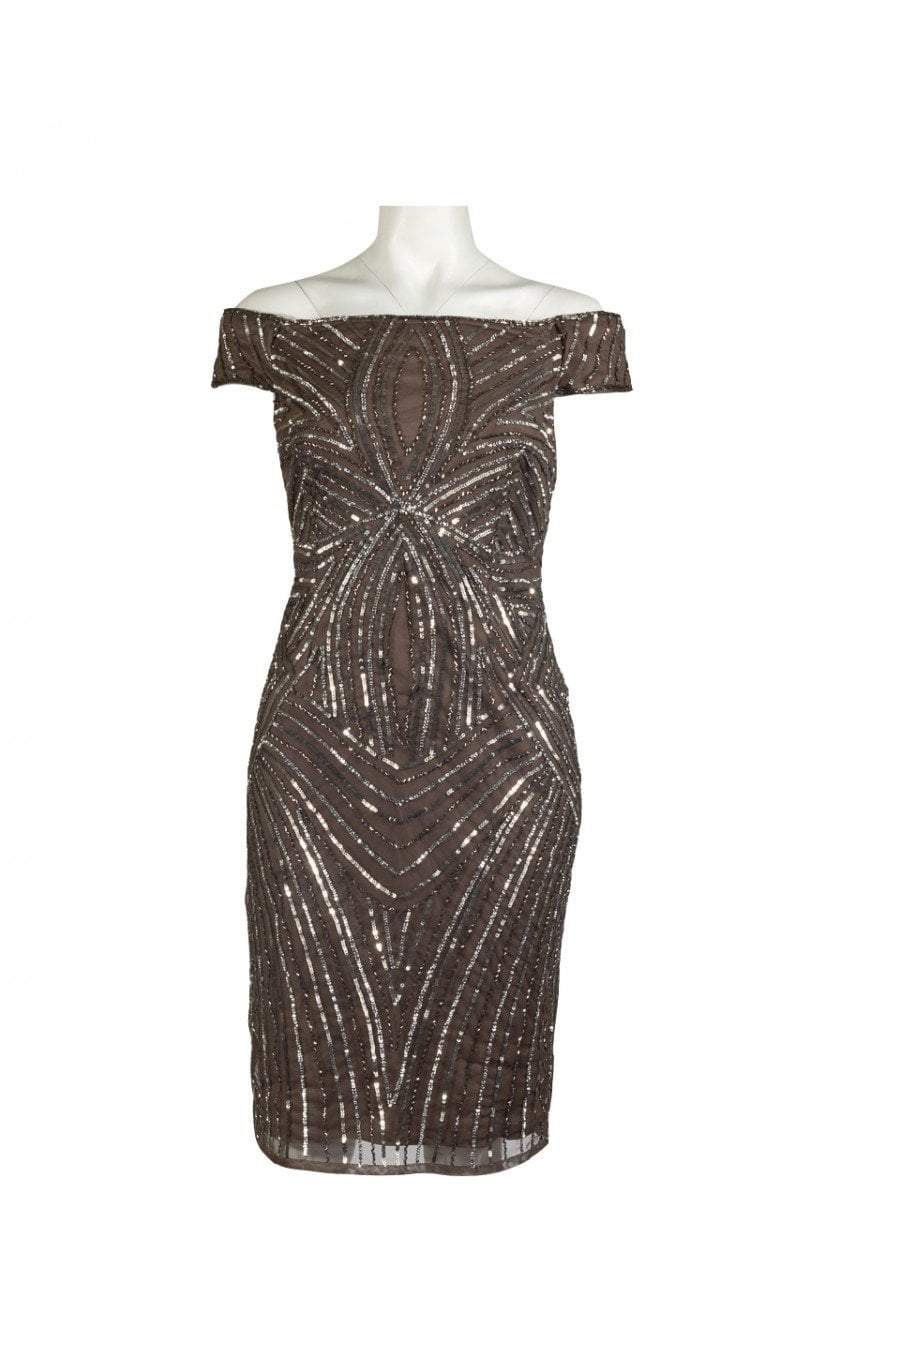 Image of Adrianna Papell - AP1E201100 Sequined Off-Shoulder Sheath Dress